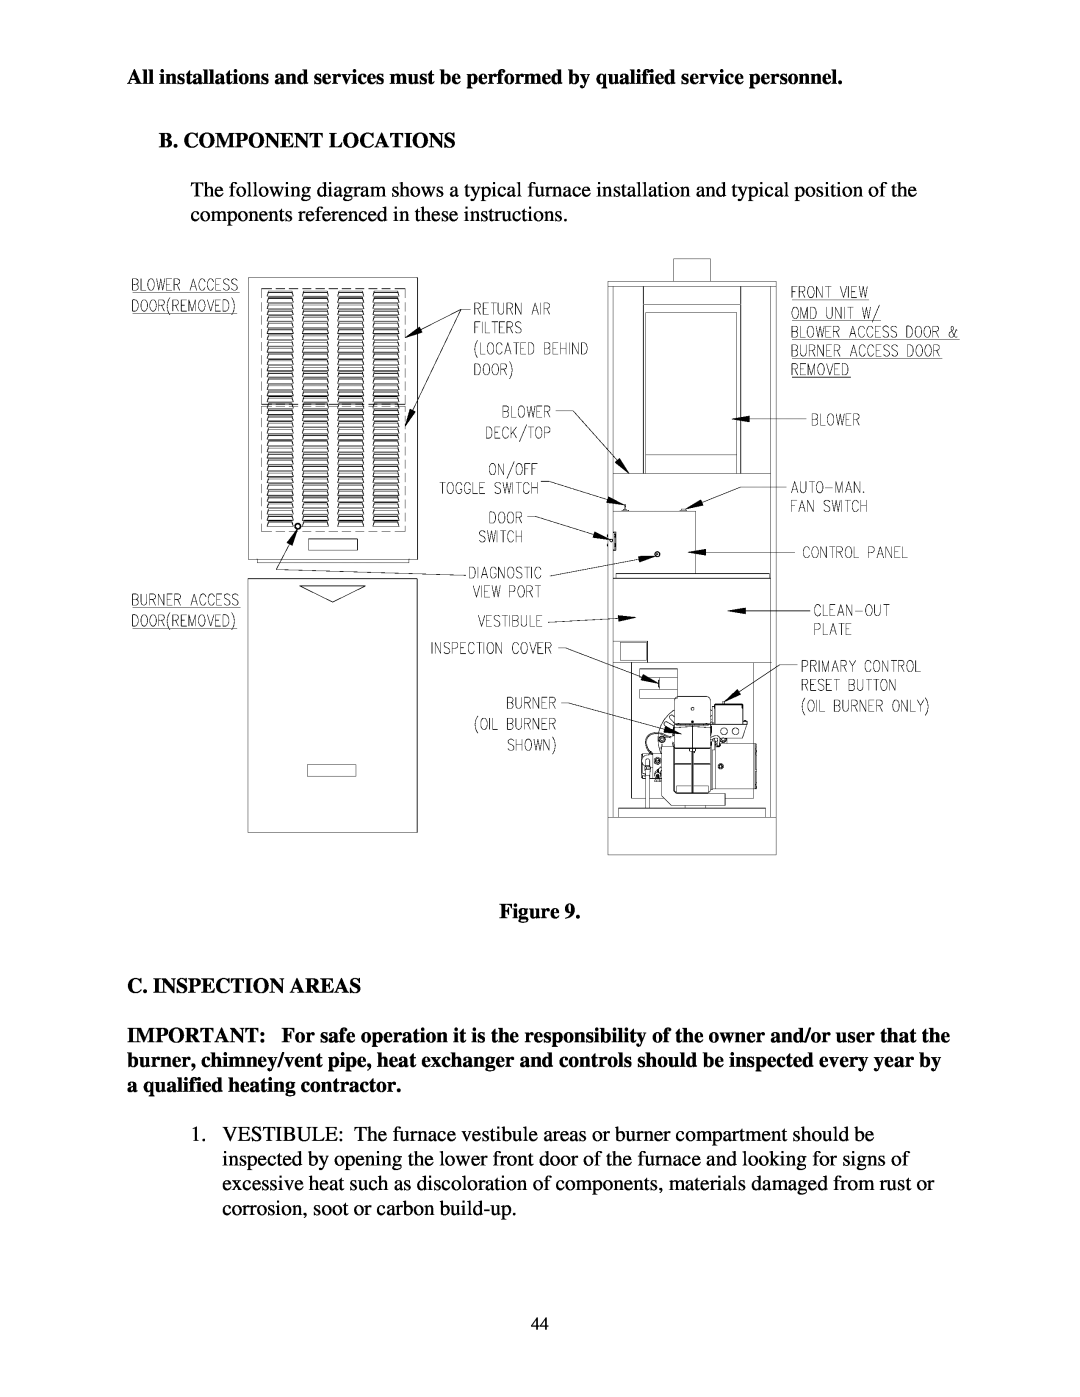 Thermo Products omd-70 service manual B. Component Locations, Figure C. INSPECTION AREAS 